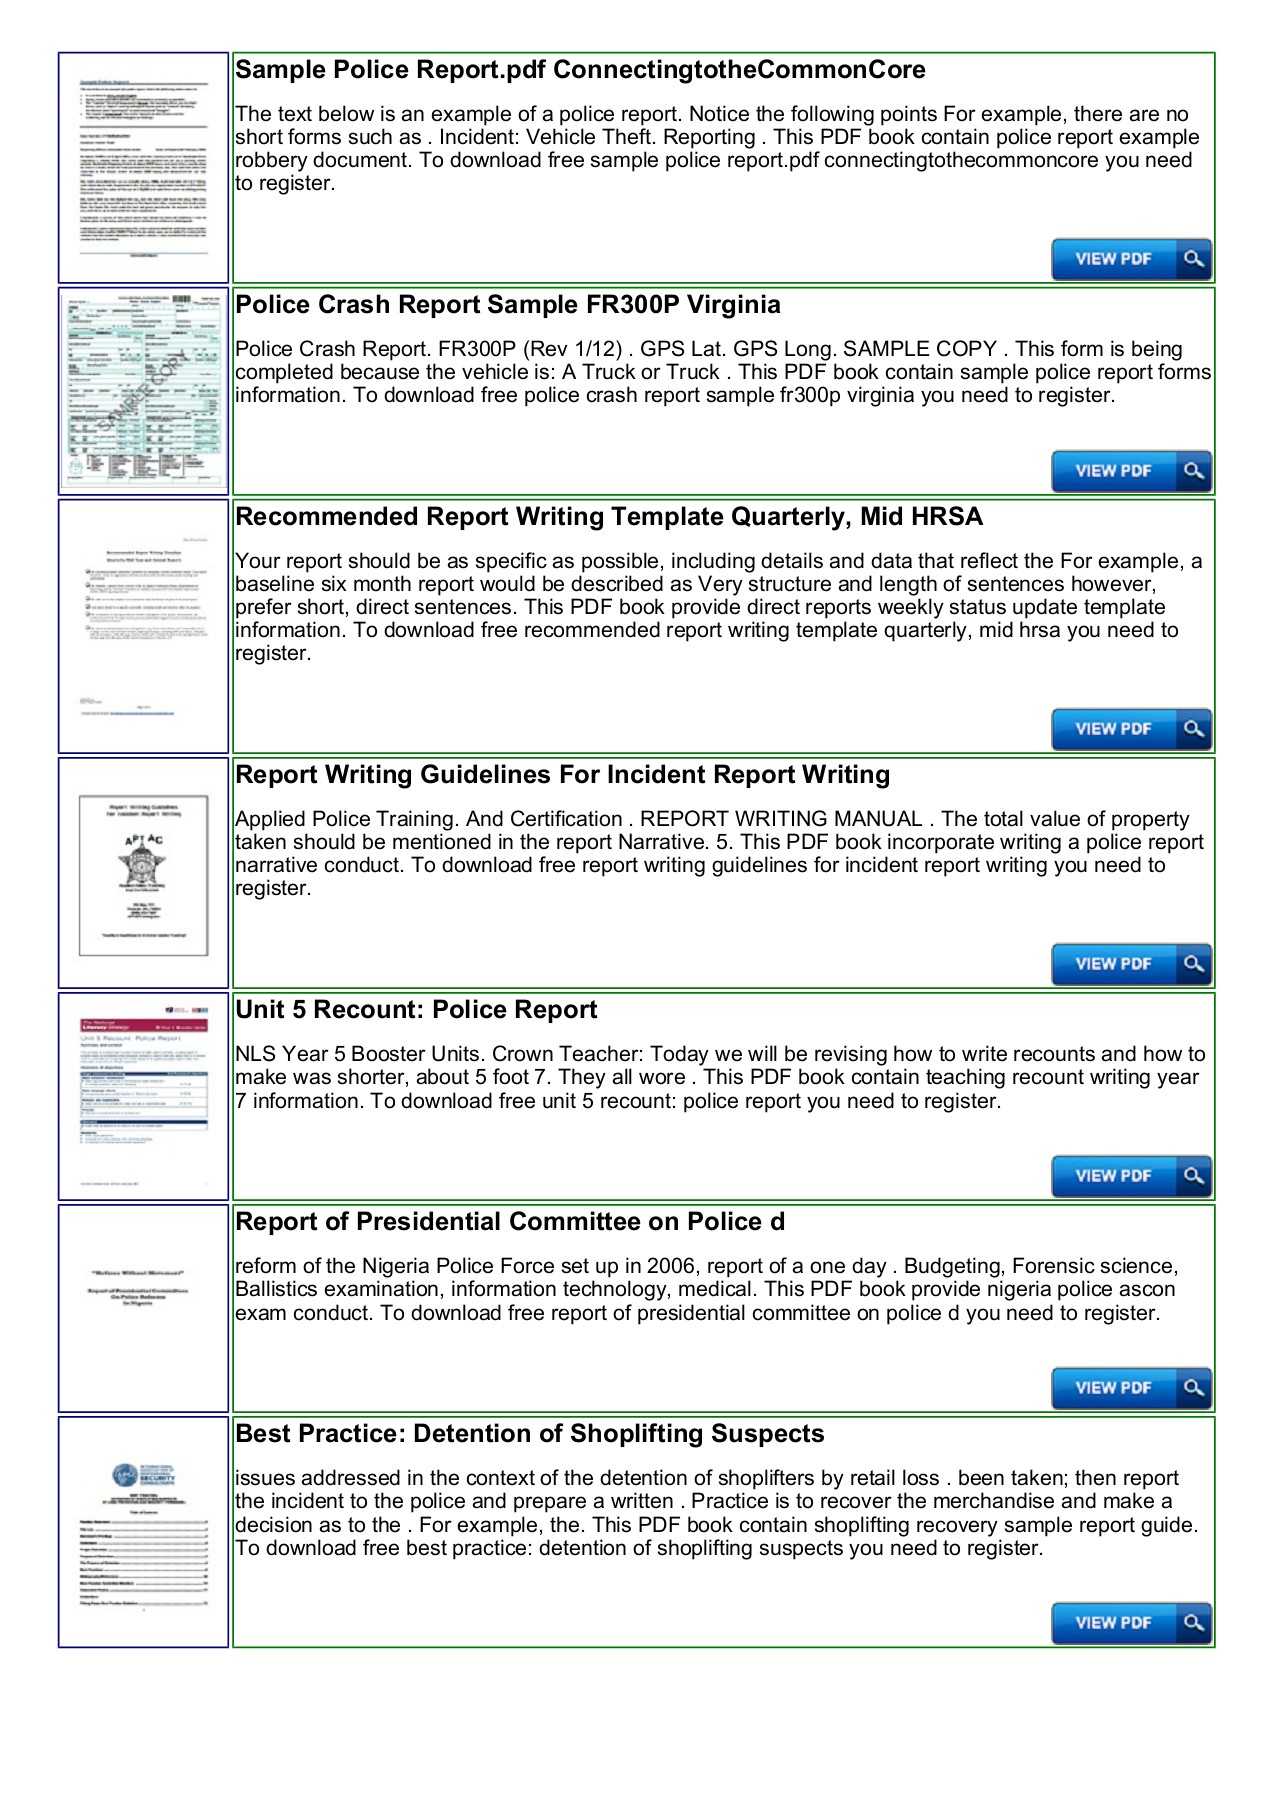 Police Shoplifting Report Writing Template Sample In Template On How To Write A Report